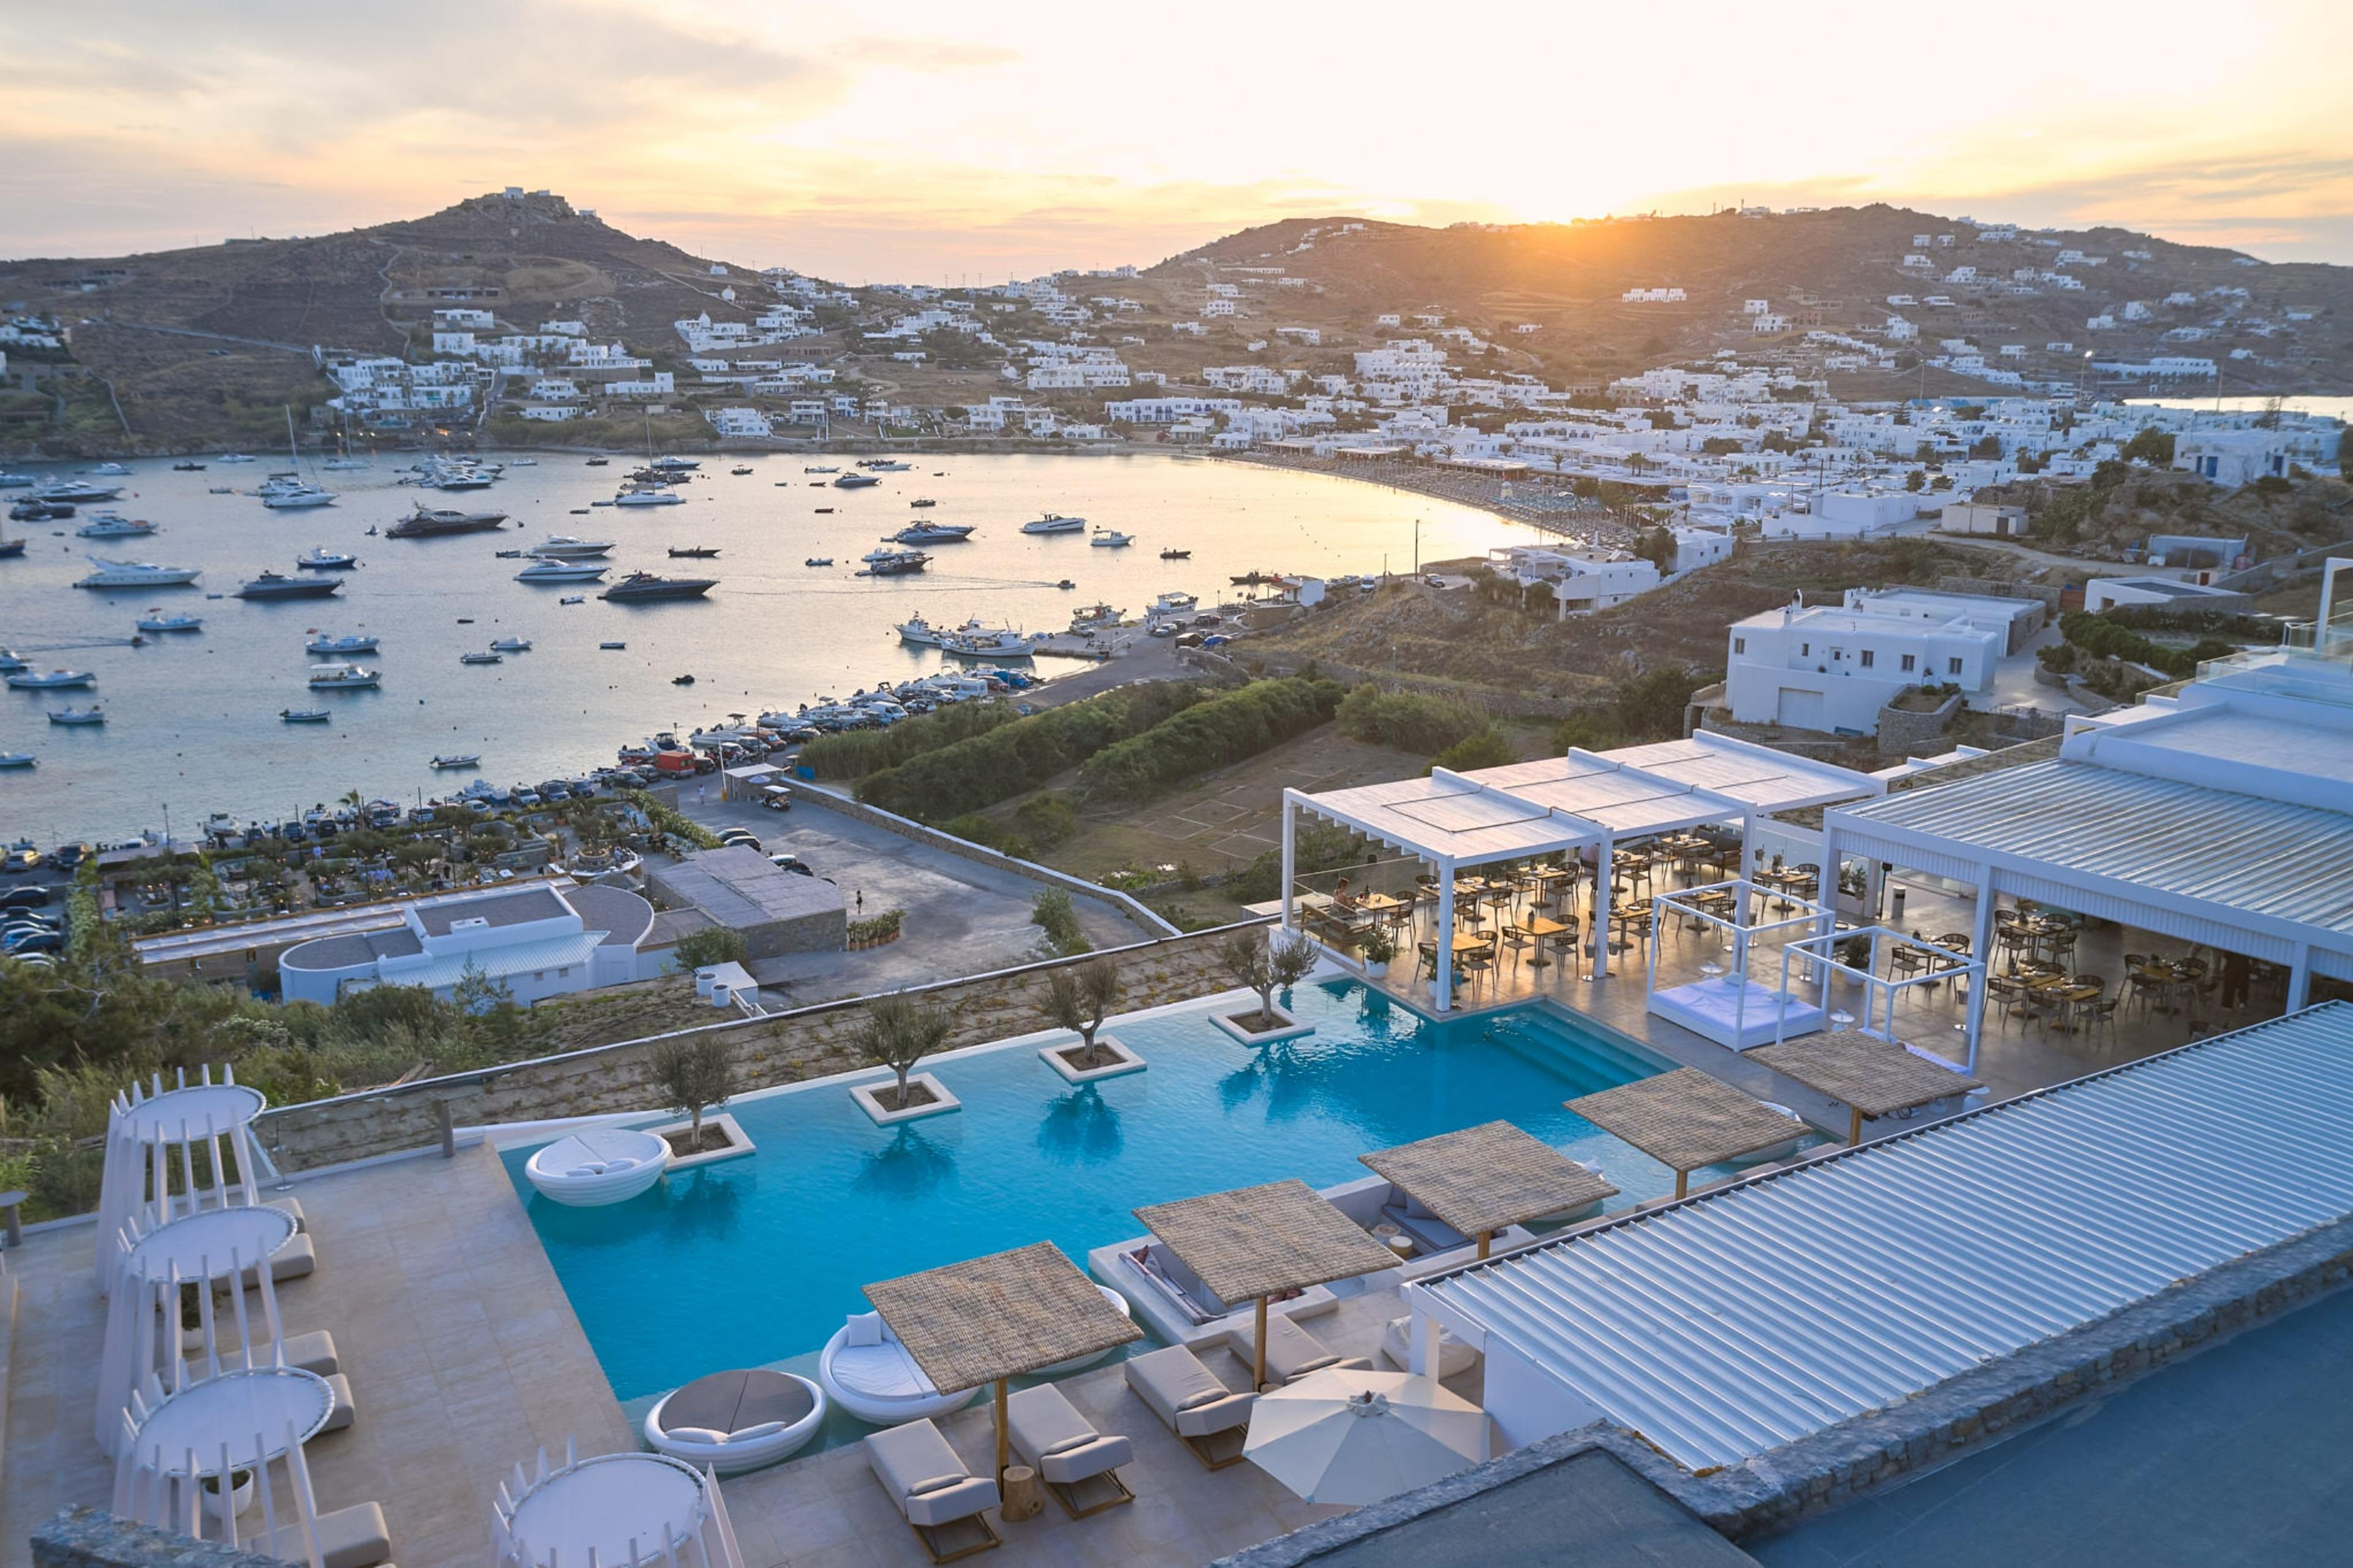 Once in Mykonos, Designed For Adults